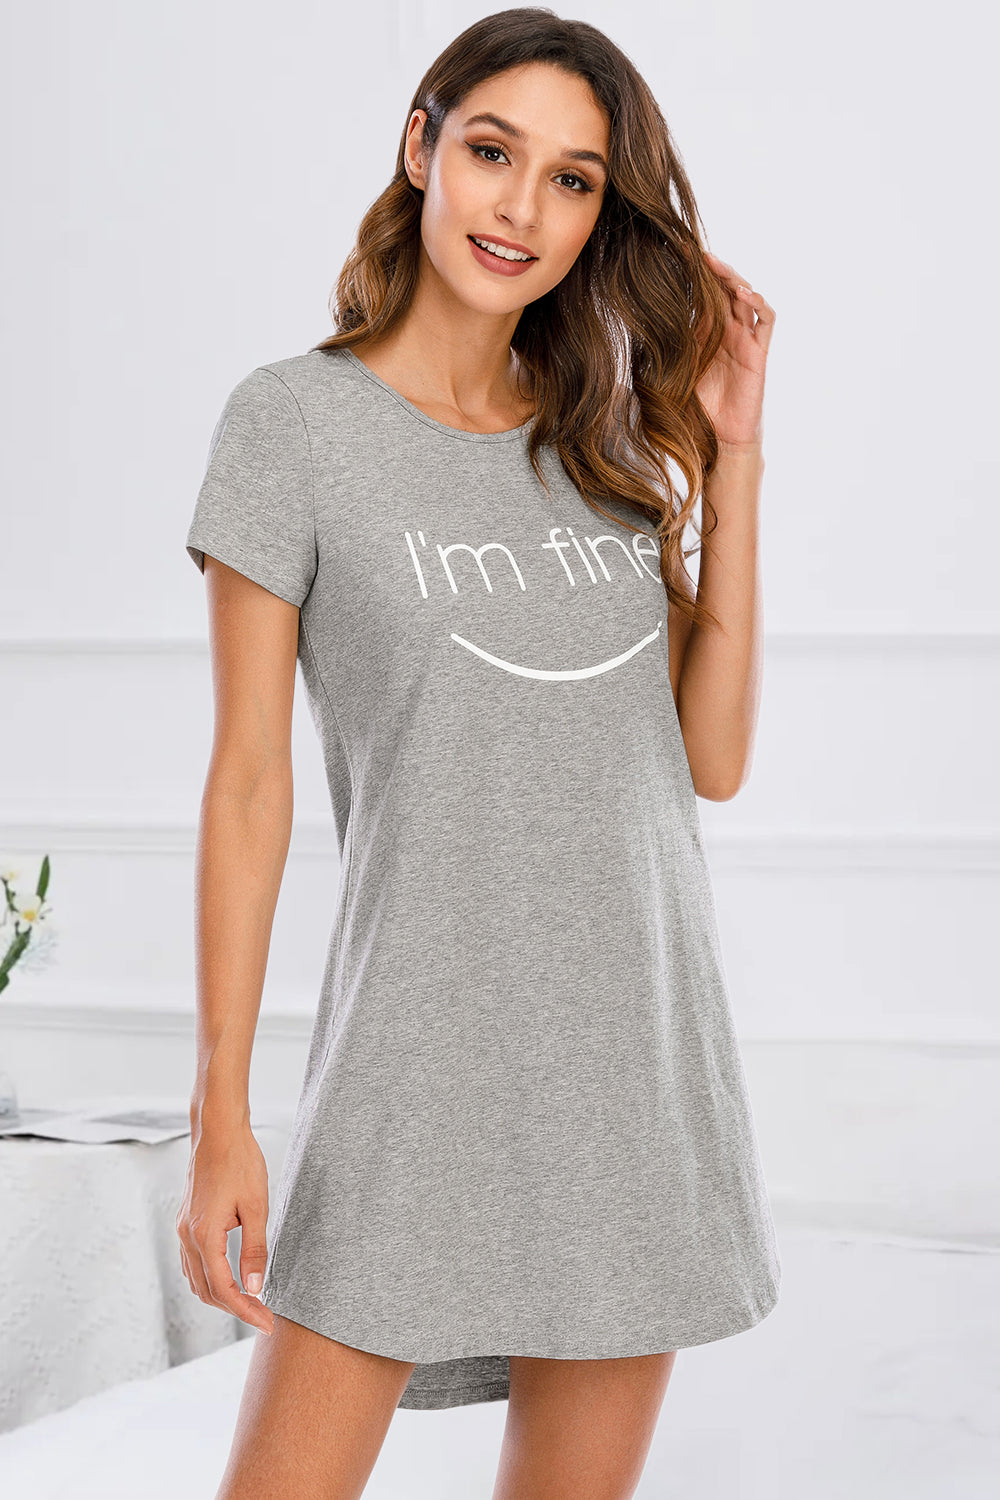 Graphic Round Neck Short Sleeve Lounge Dress - Tophatter Deals and Online Shopping - Electronics, Jewelry, Beauty, Health, Gadgets, Fashion - Tophatter's Discounts & Offers - tophatters - tophatters.co